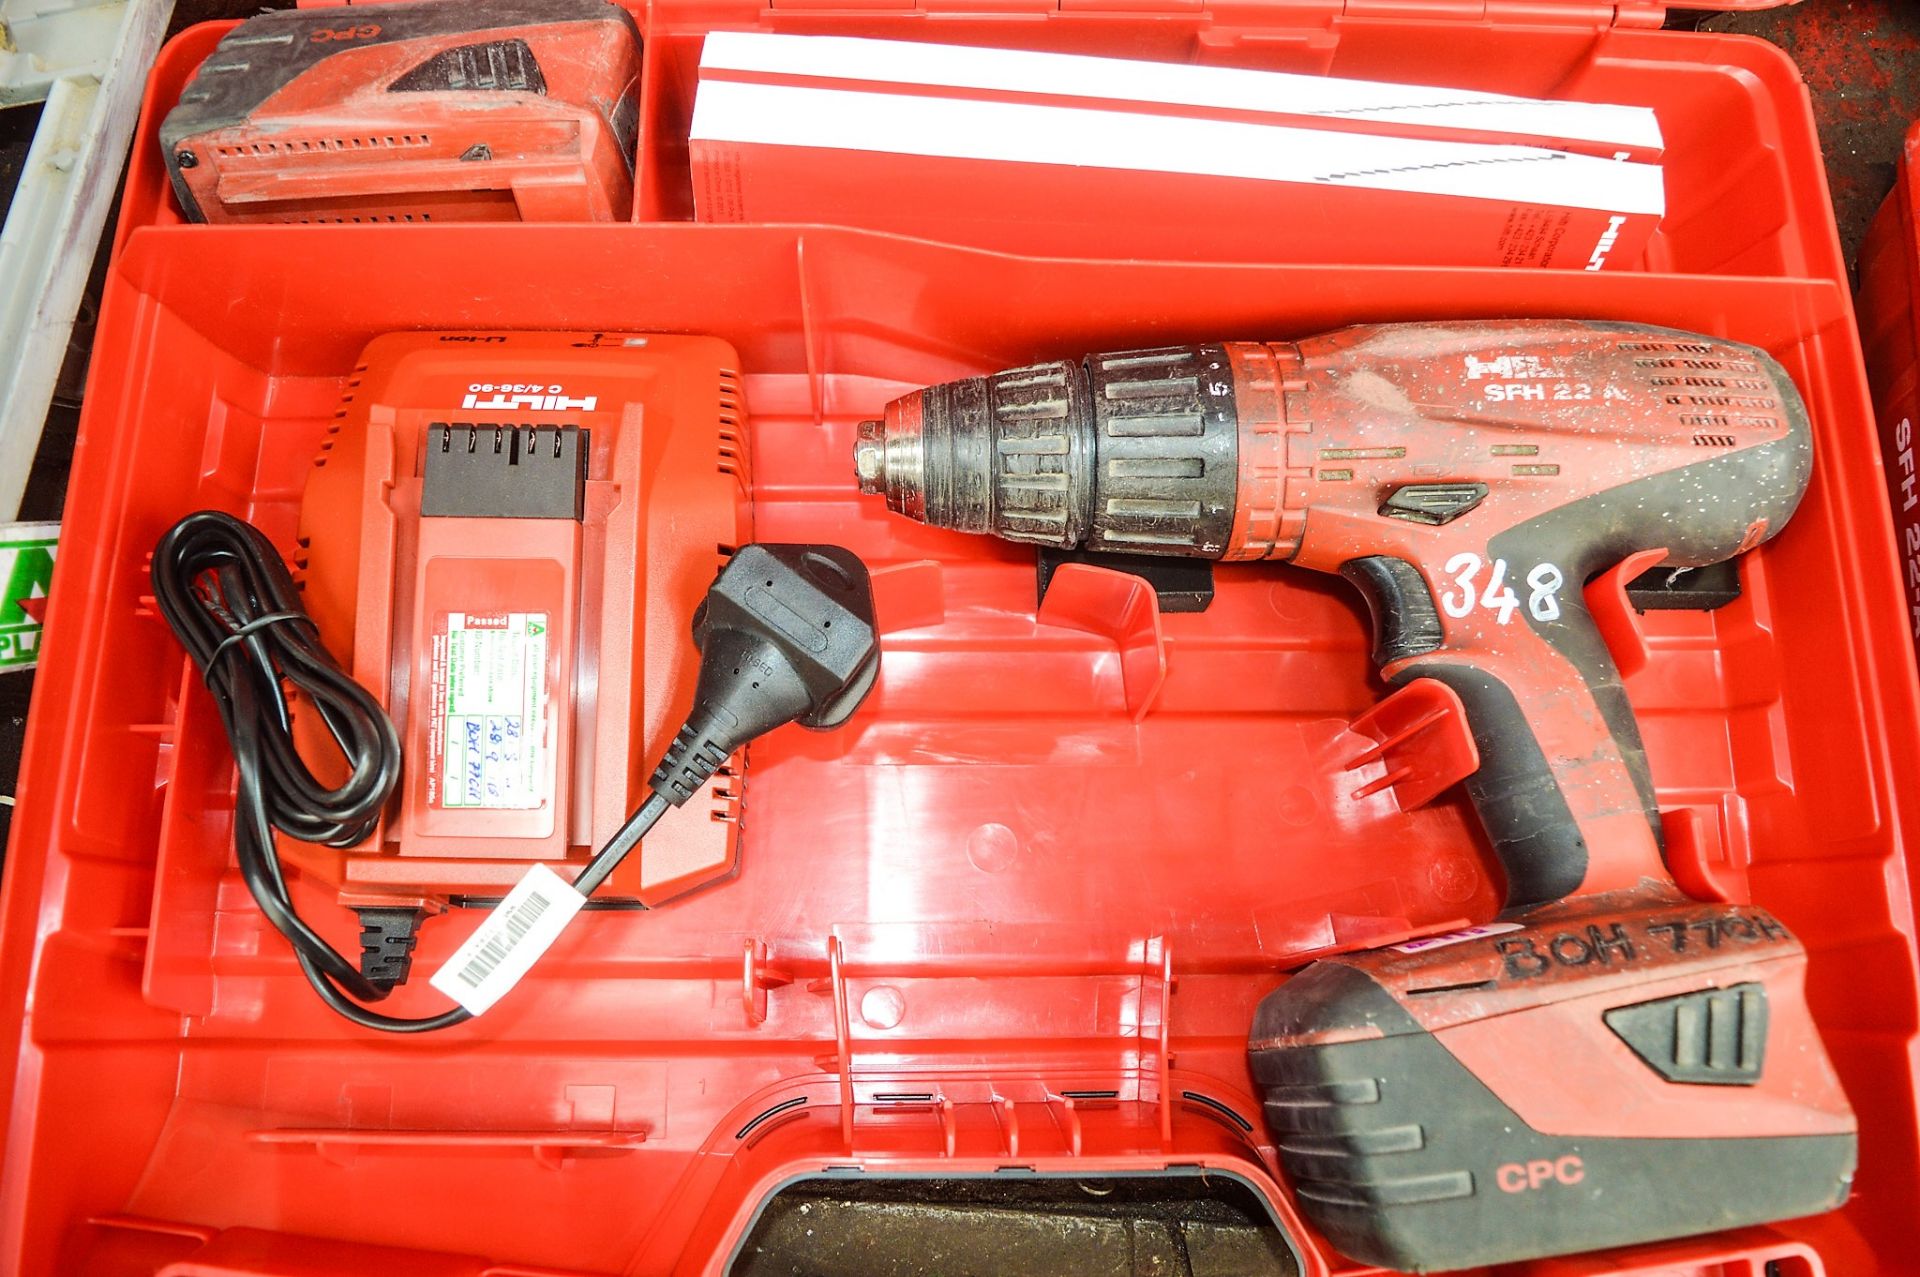 Hilti SFH22-A 22v cordless power drill c/w charger, 2 batteries & carry case BOH770H